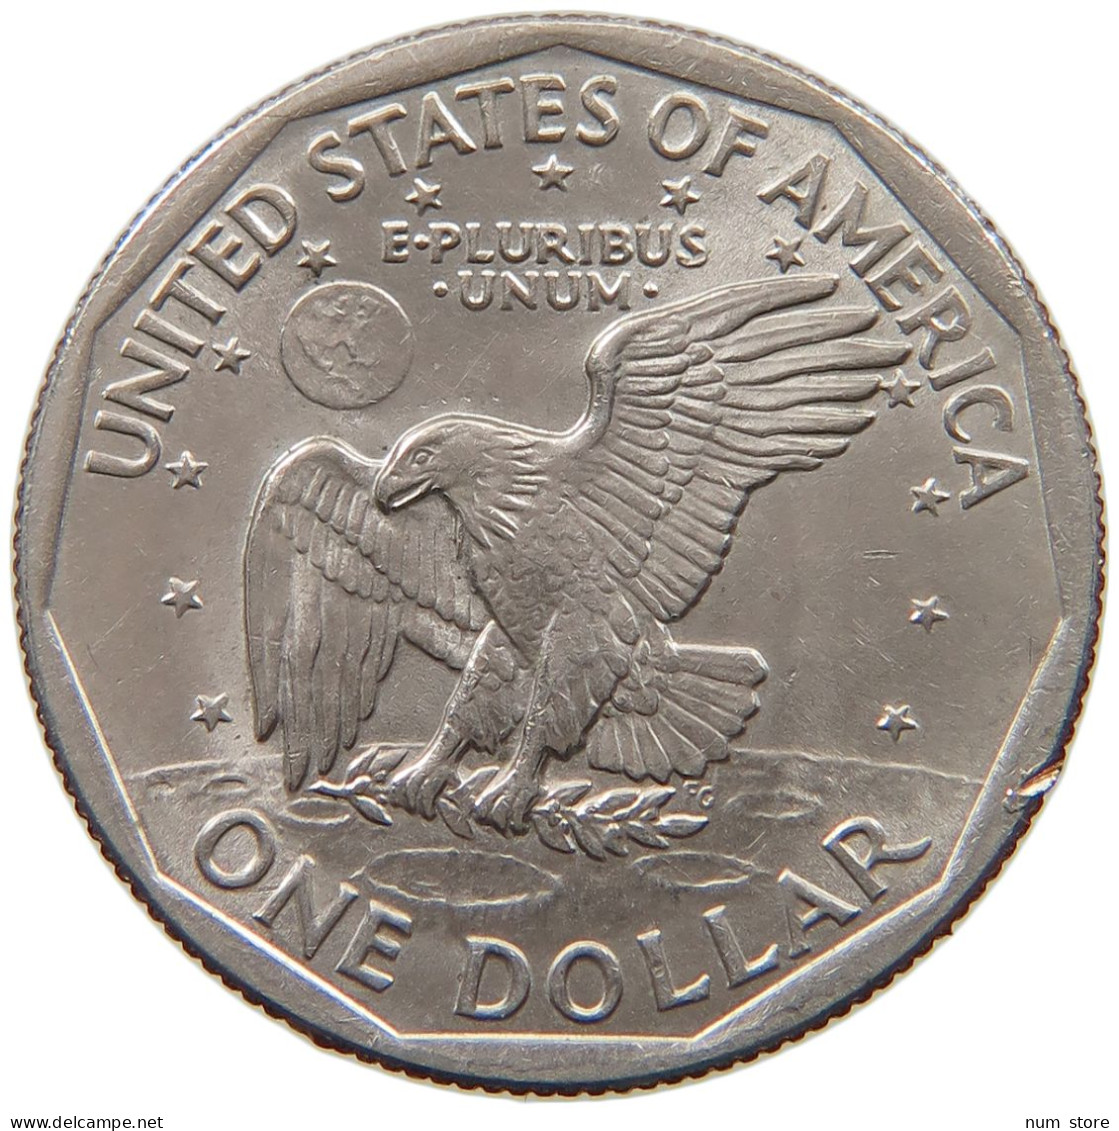 UNITED STATES OF AMERICA DOLLAR 1979 D Susan B Anthony (1979-1999) #a034 0423 - 1979-1999: Anthony